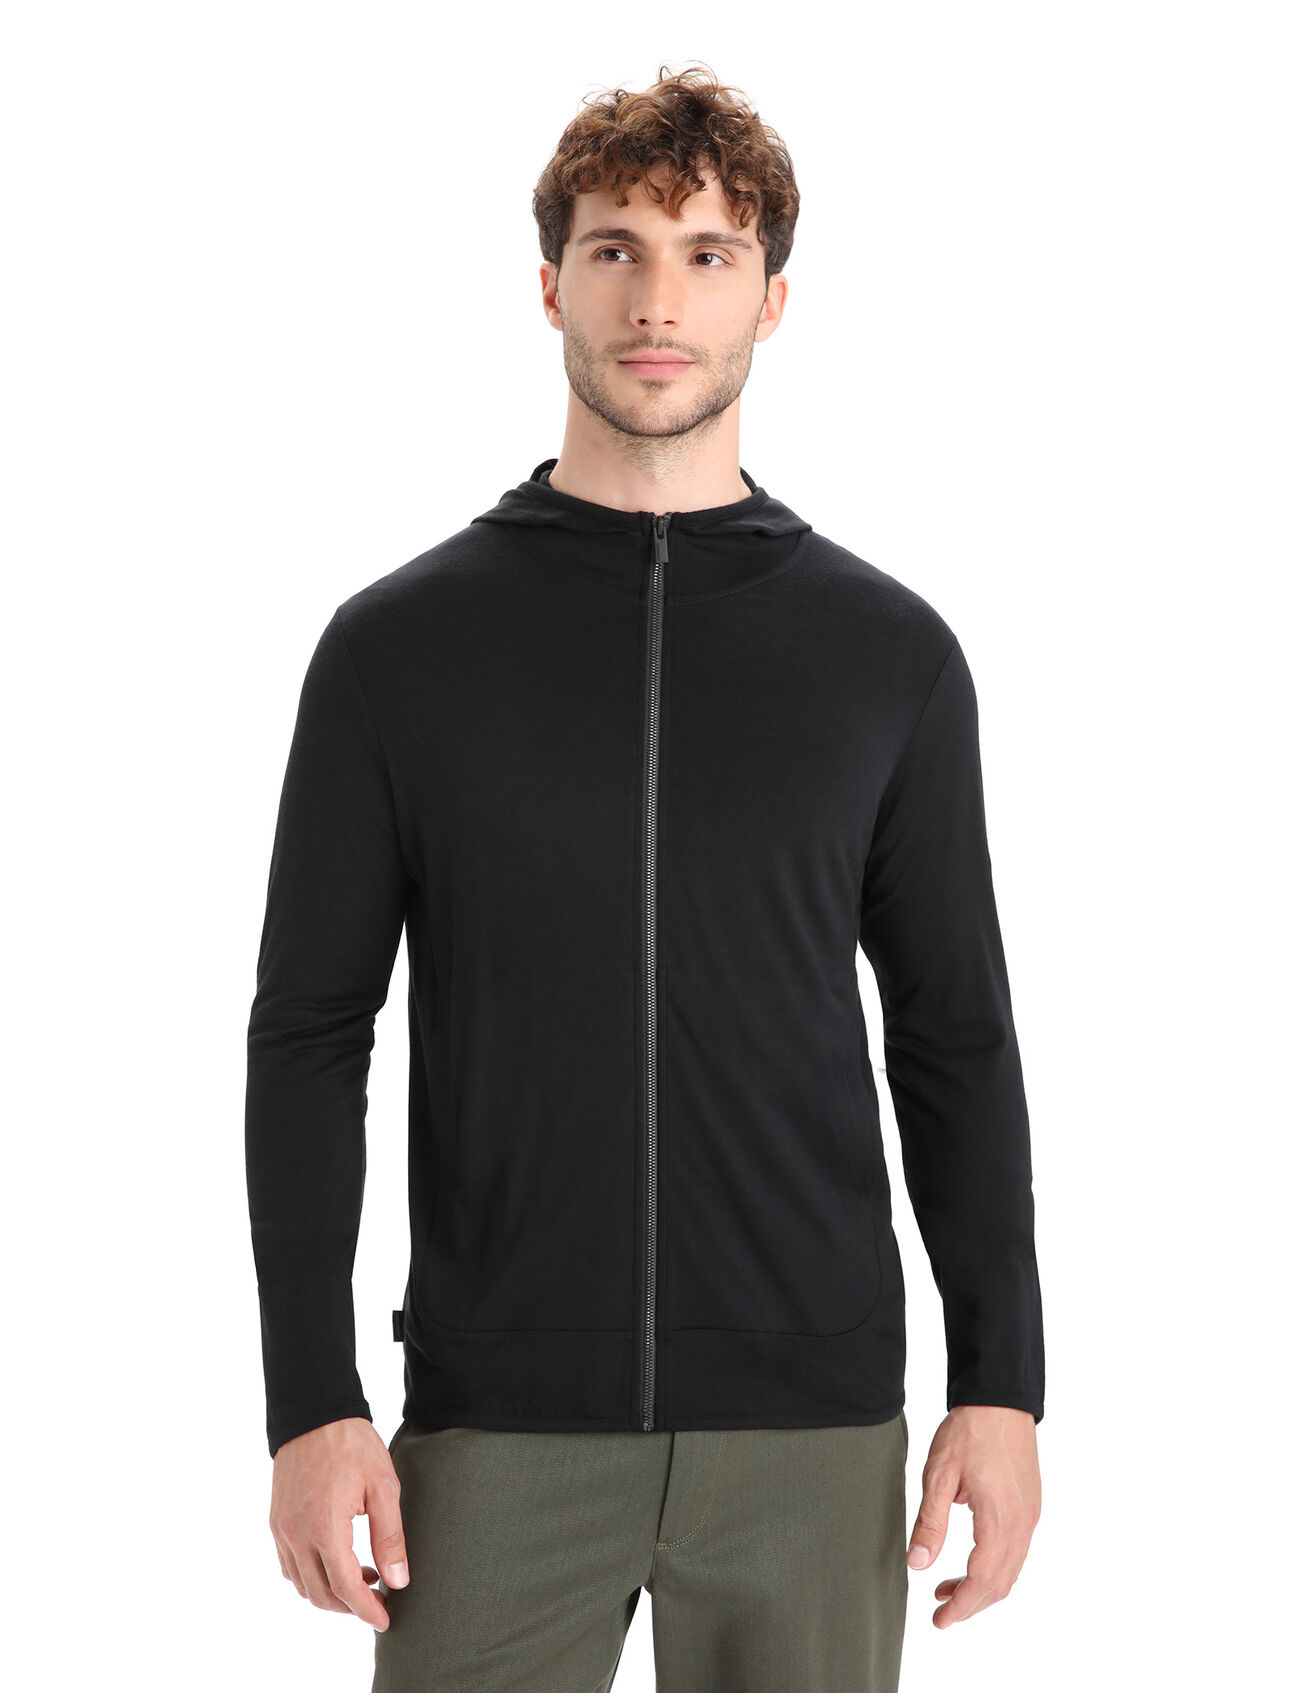 Mens Merino Granary Long Sleeve Zip Hoodie A lightweight everyday hoodie perfect for down-time in town or exploring the outdoors, the Granary Long Sleeve Zip Hoodie is loaded with natural style and breathable comfort thanks to 100% merino wool fabric.